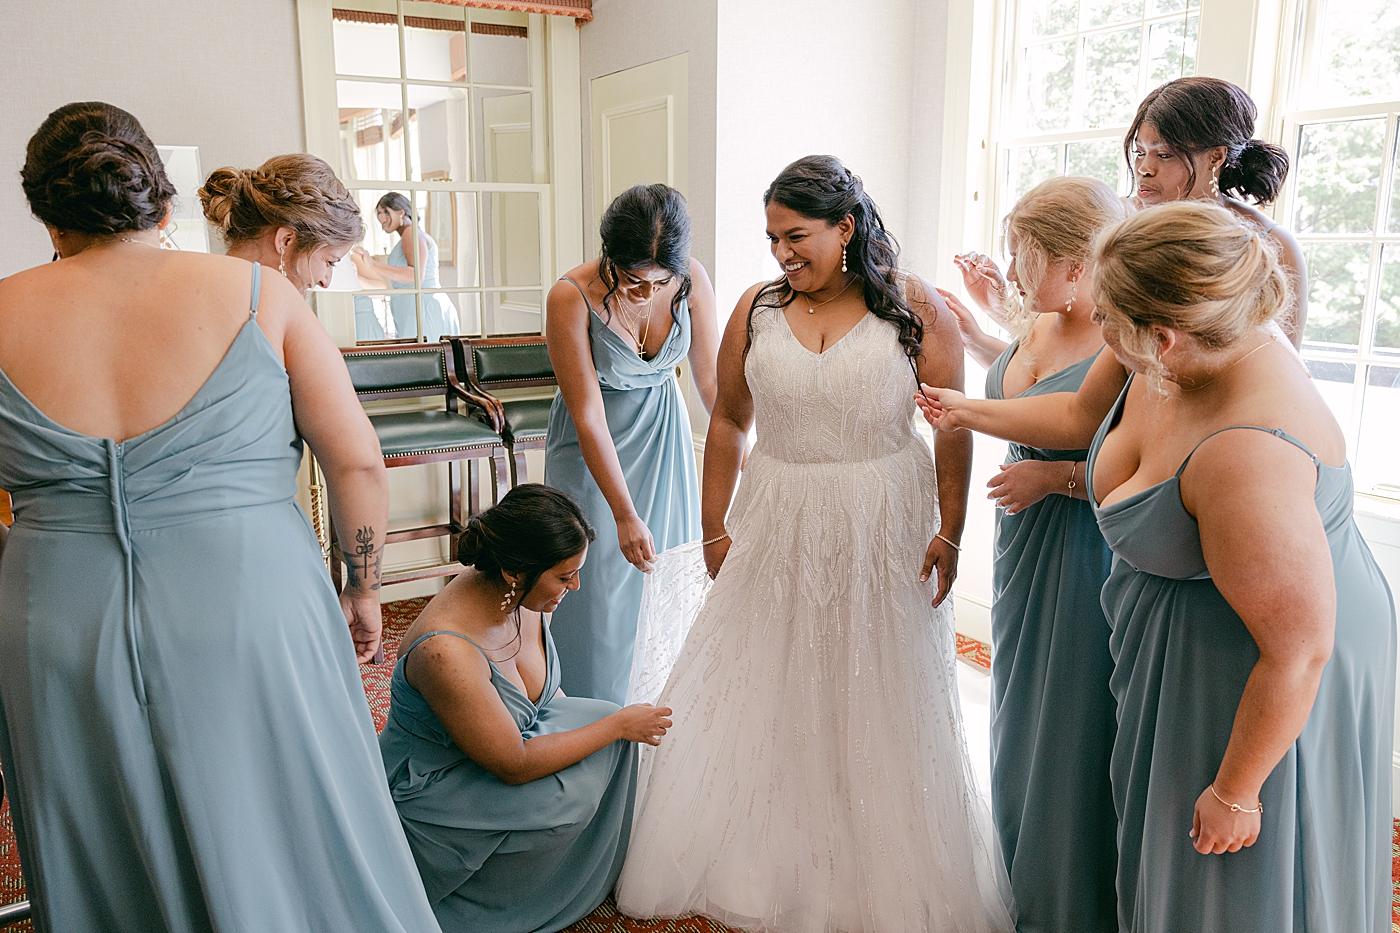 Bridesmaids helping a bride into her wedding dress during Sagamore Wedding | Image by Hope Helmuth Photography